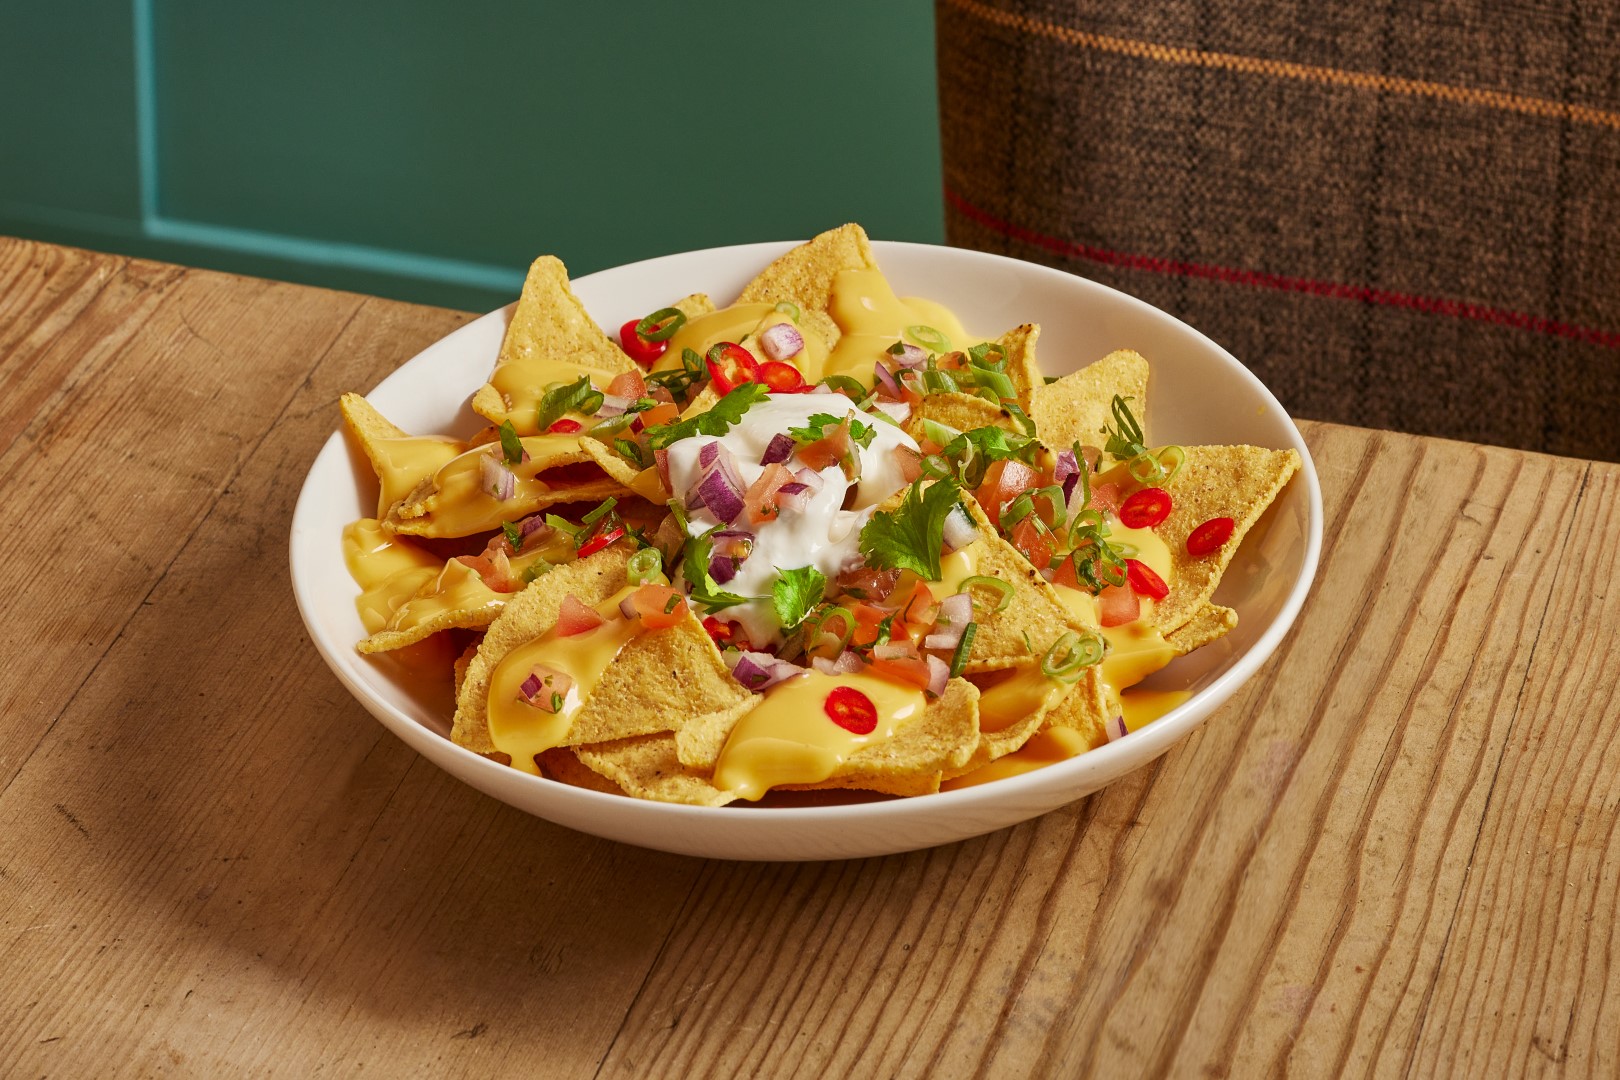 Cookhouse + Pub Loaded Nachos With cheese, red chillis, tomato salsa and reduced-fat soured cream